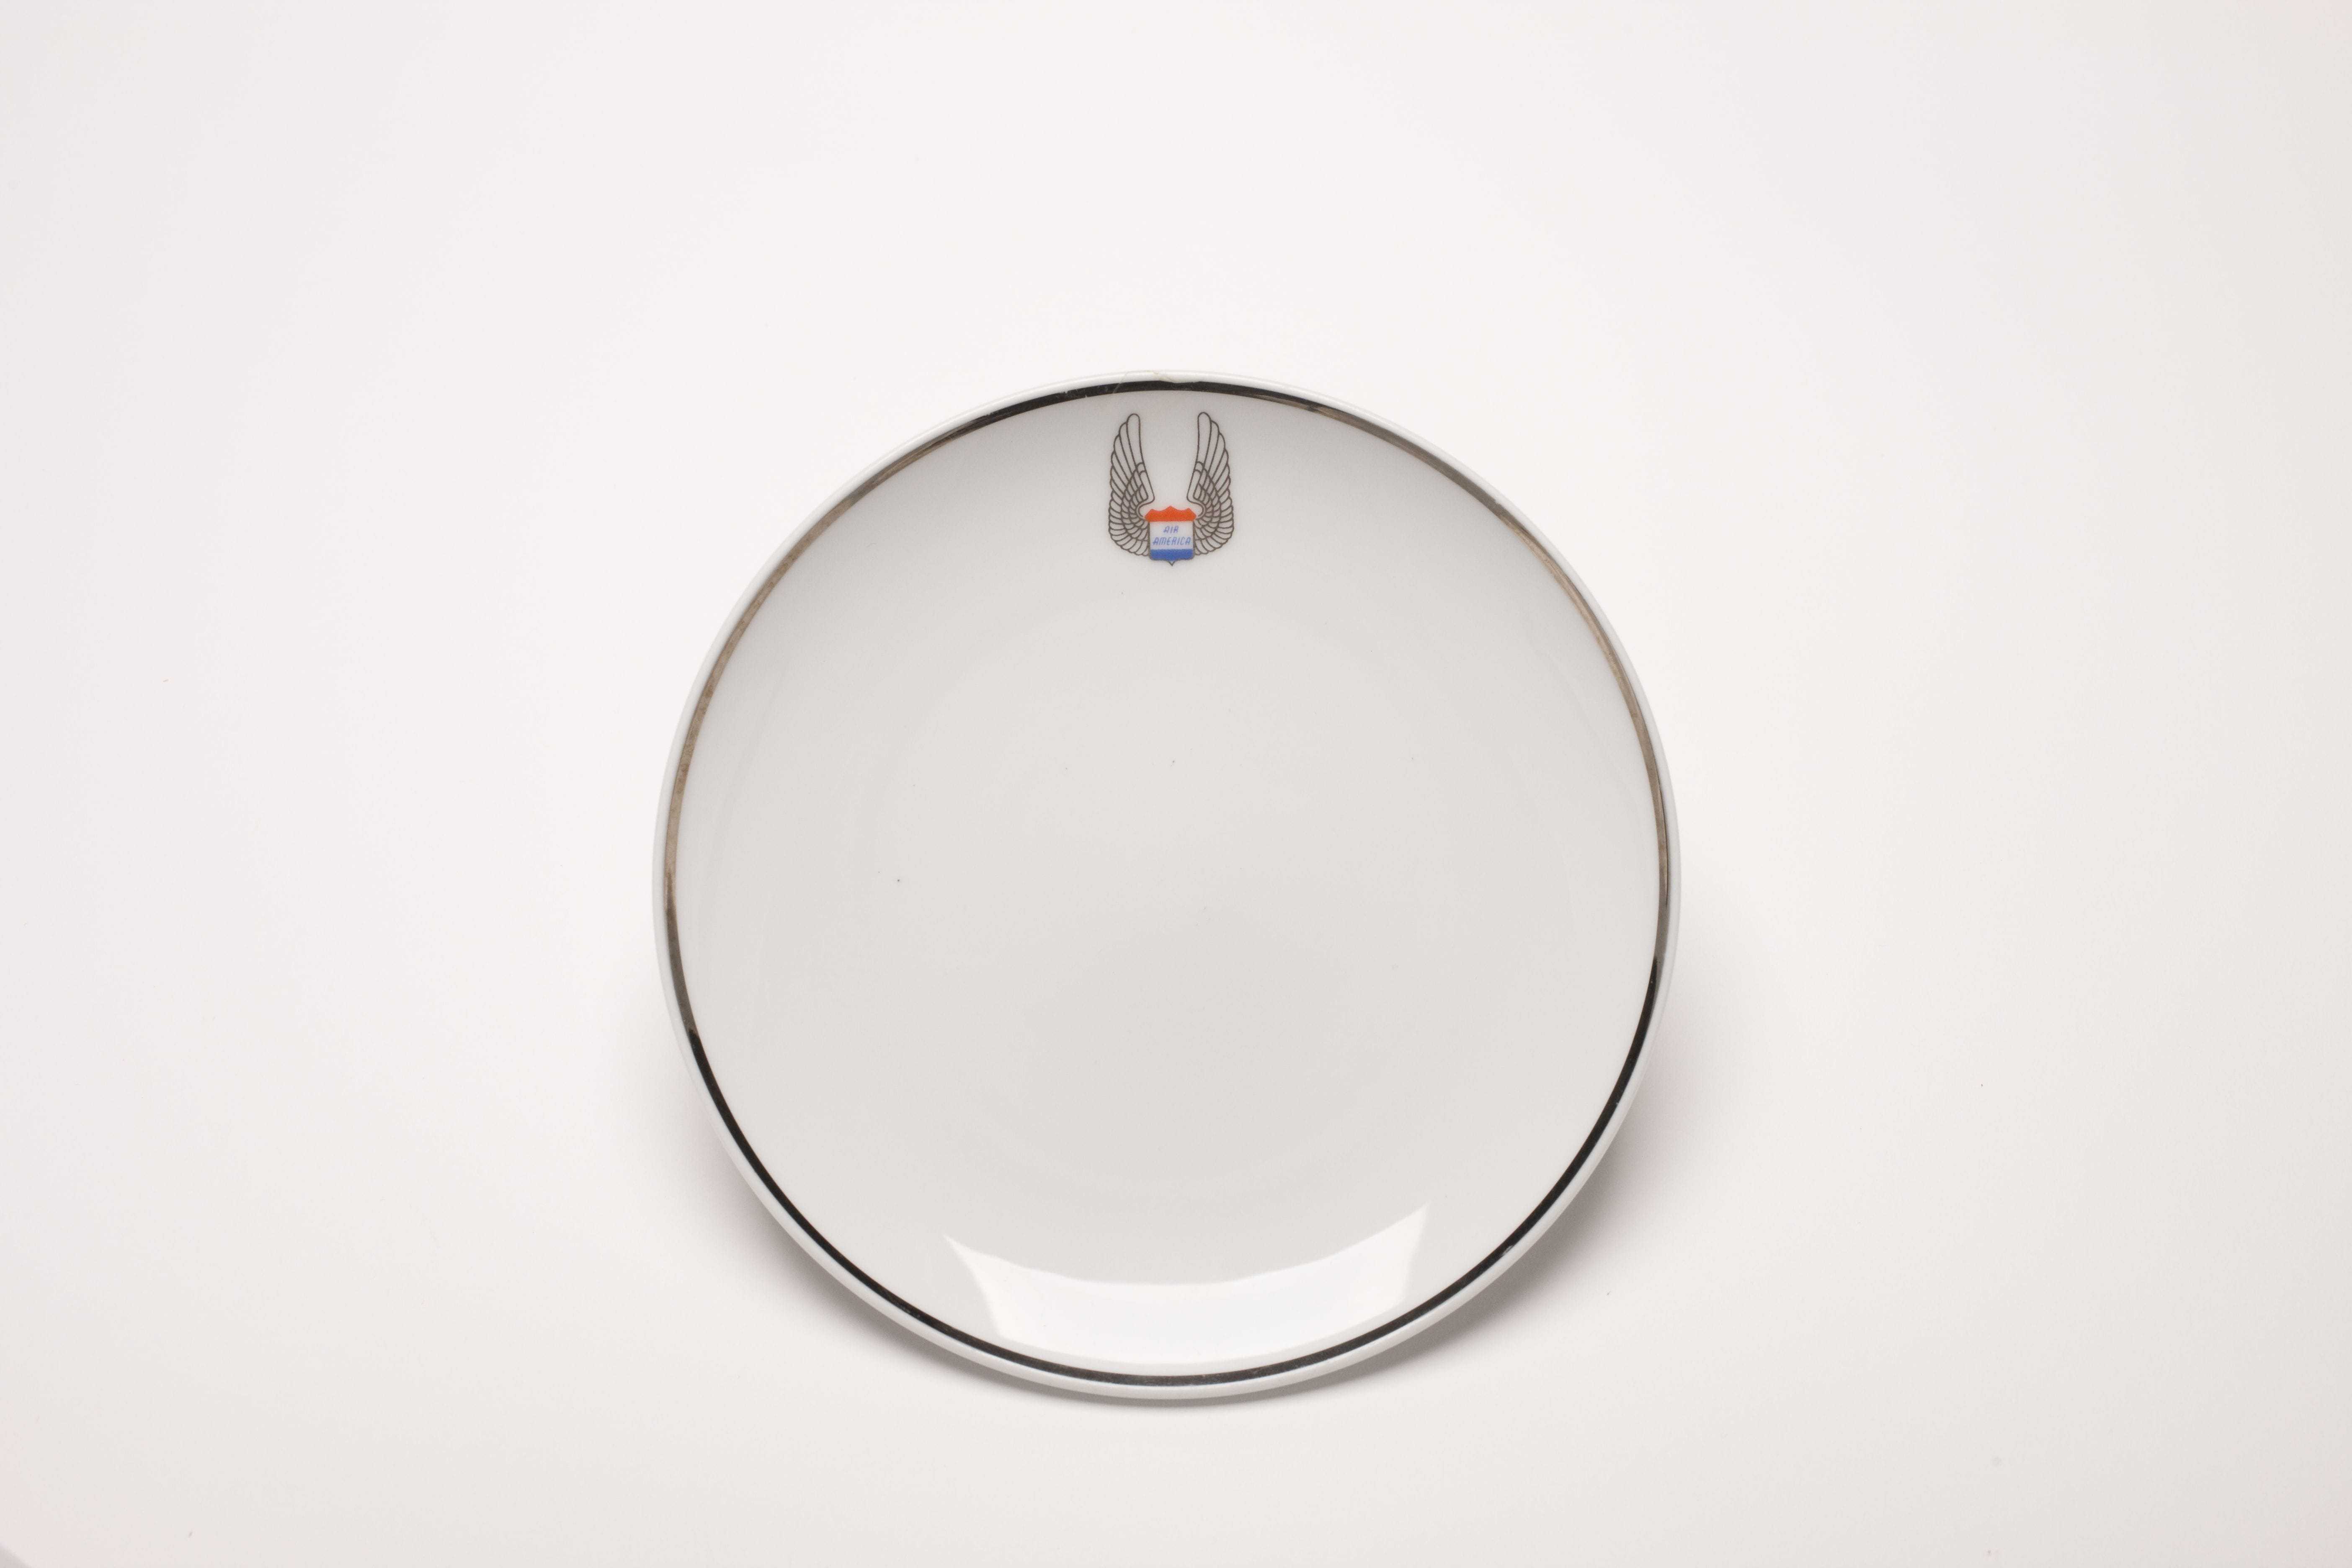 A white dinner plate with a gold rim and the Air America logo at the top